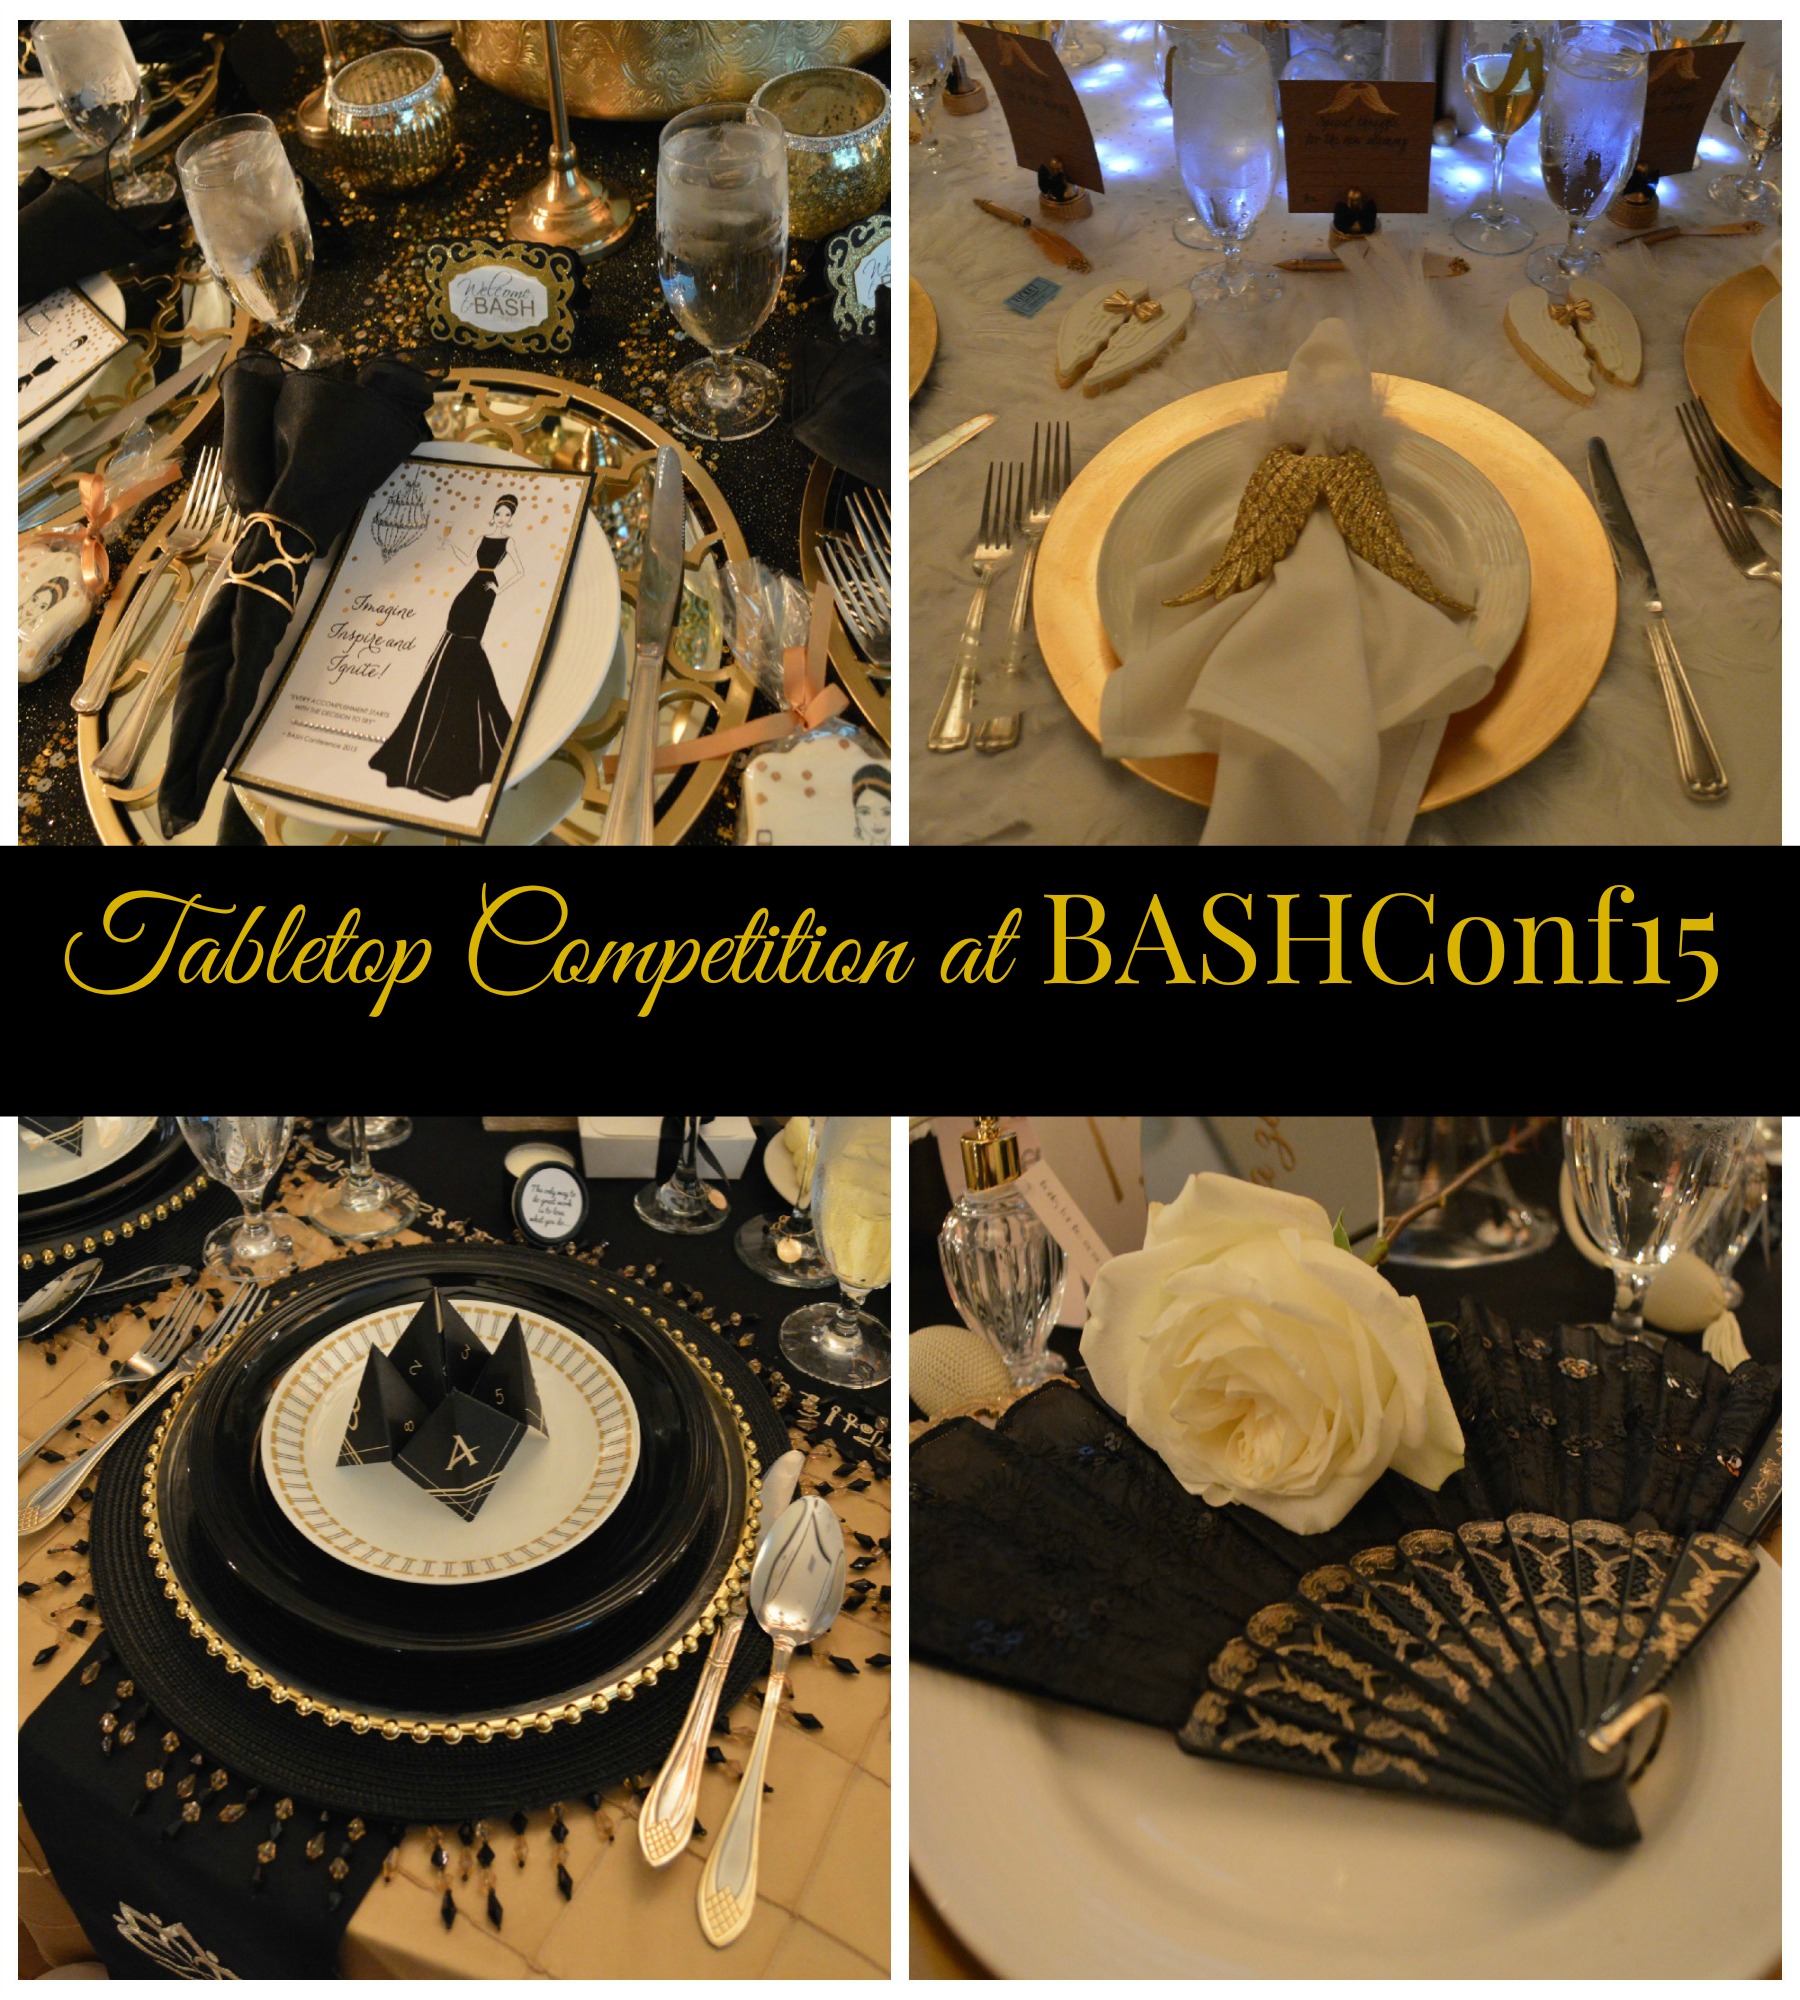 Amazing Hollywood Tablescapes from BASH Conference